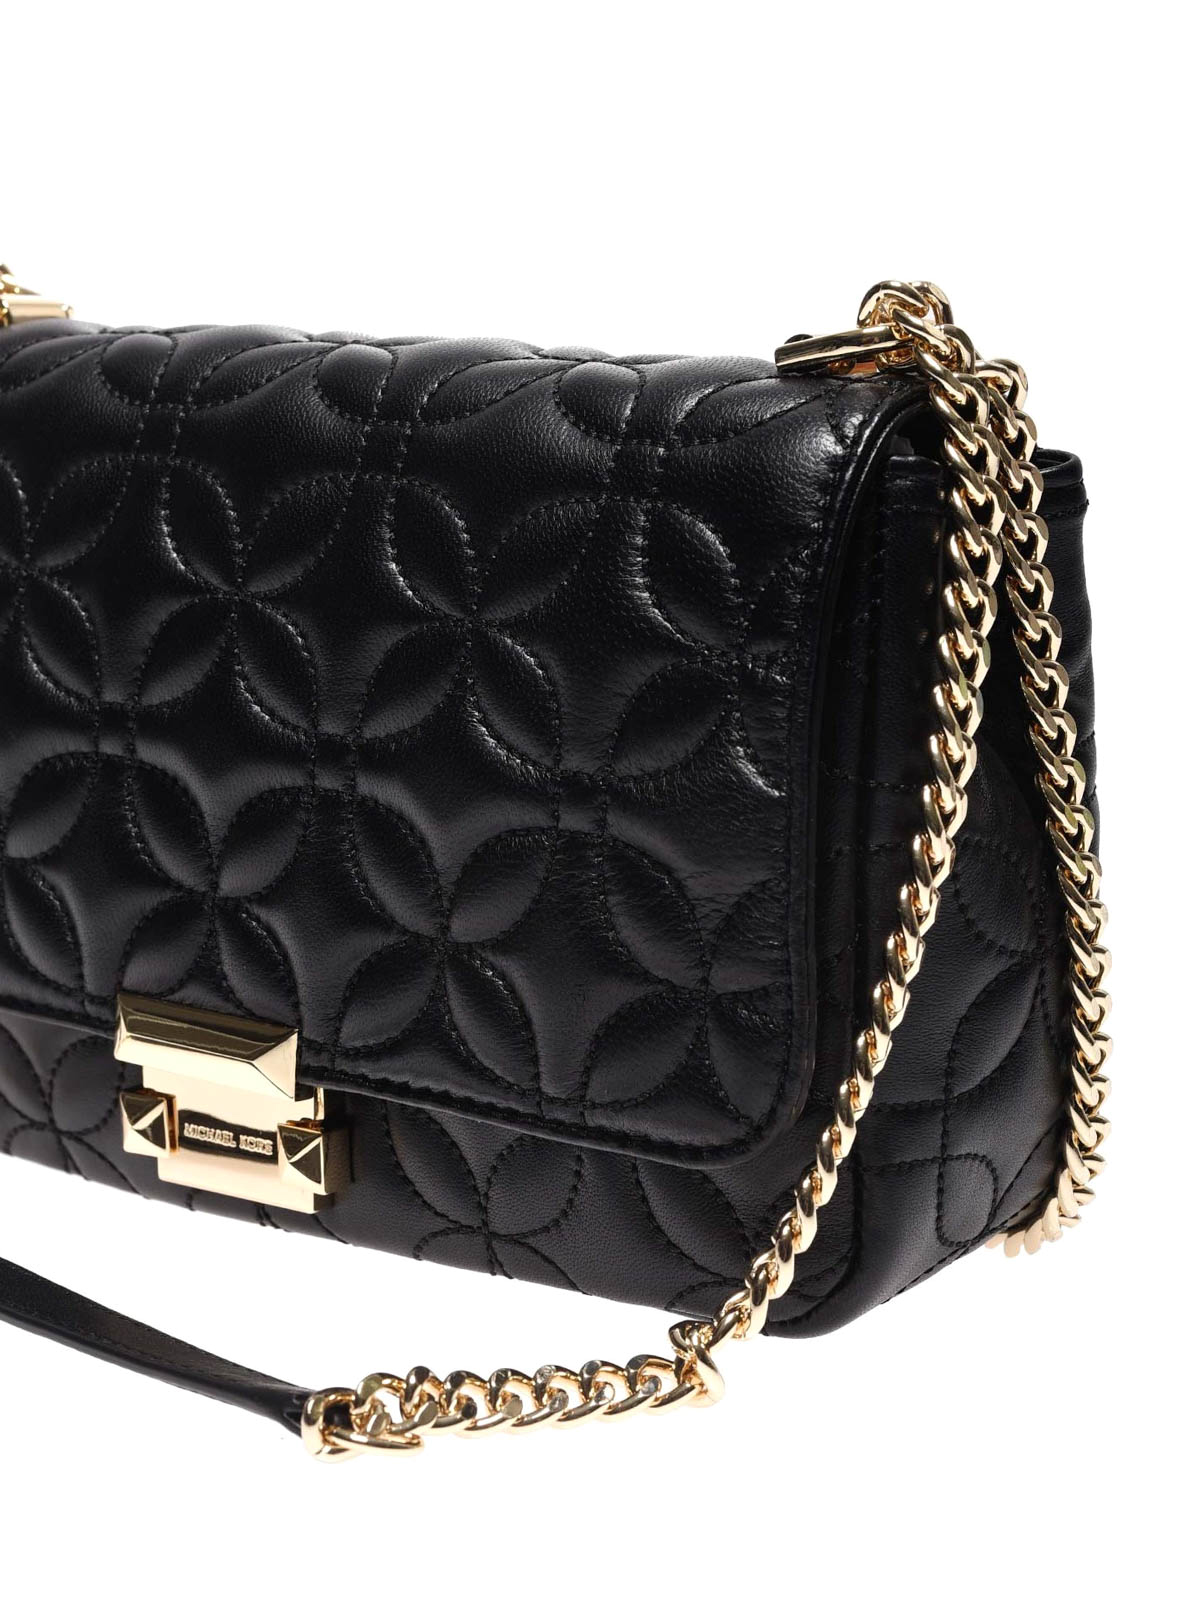 michael kors sloan large quilted